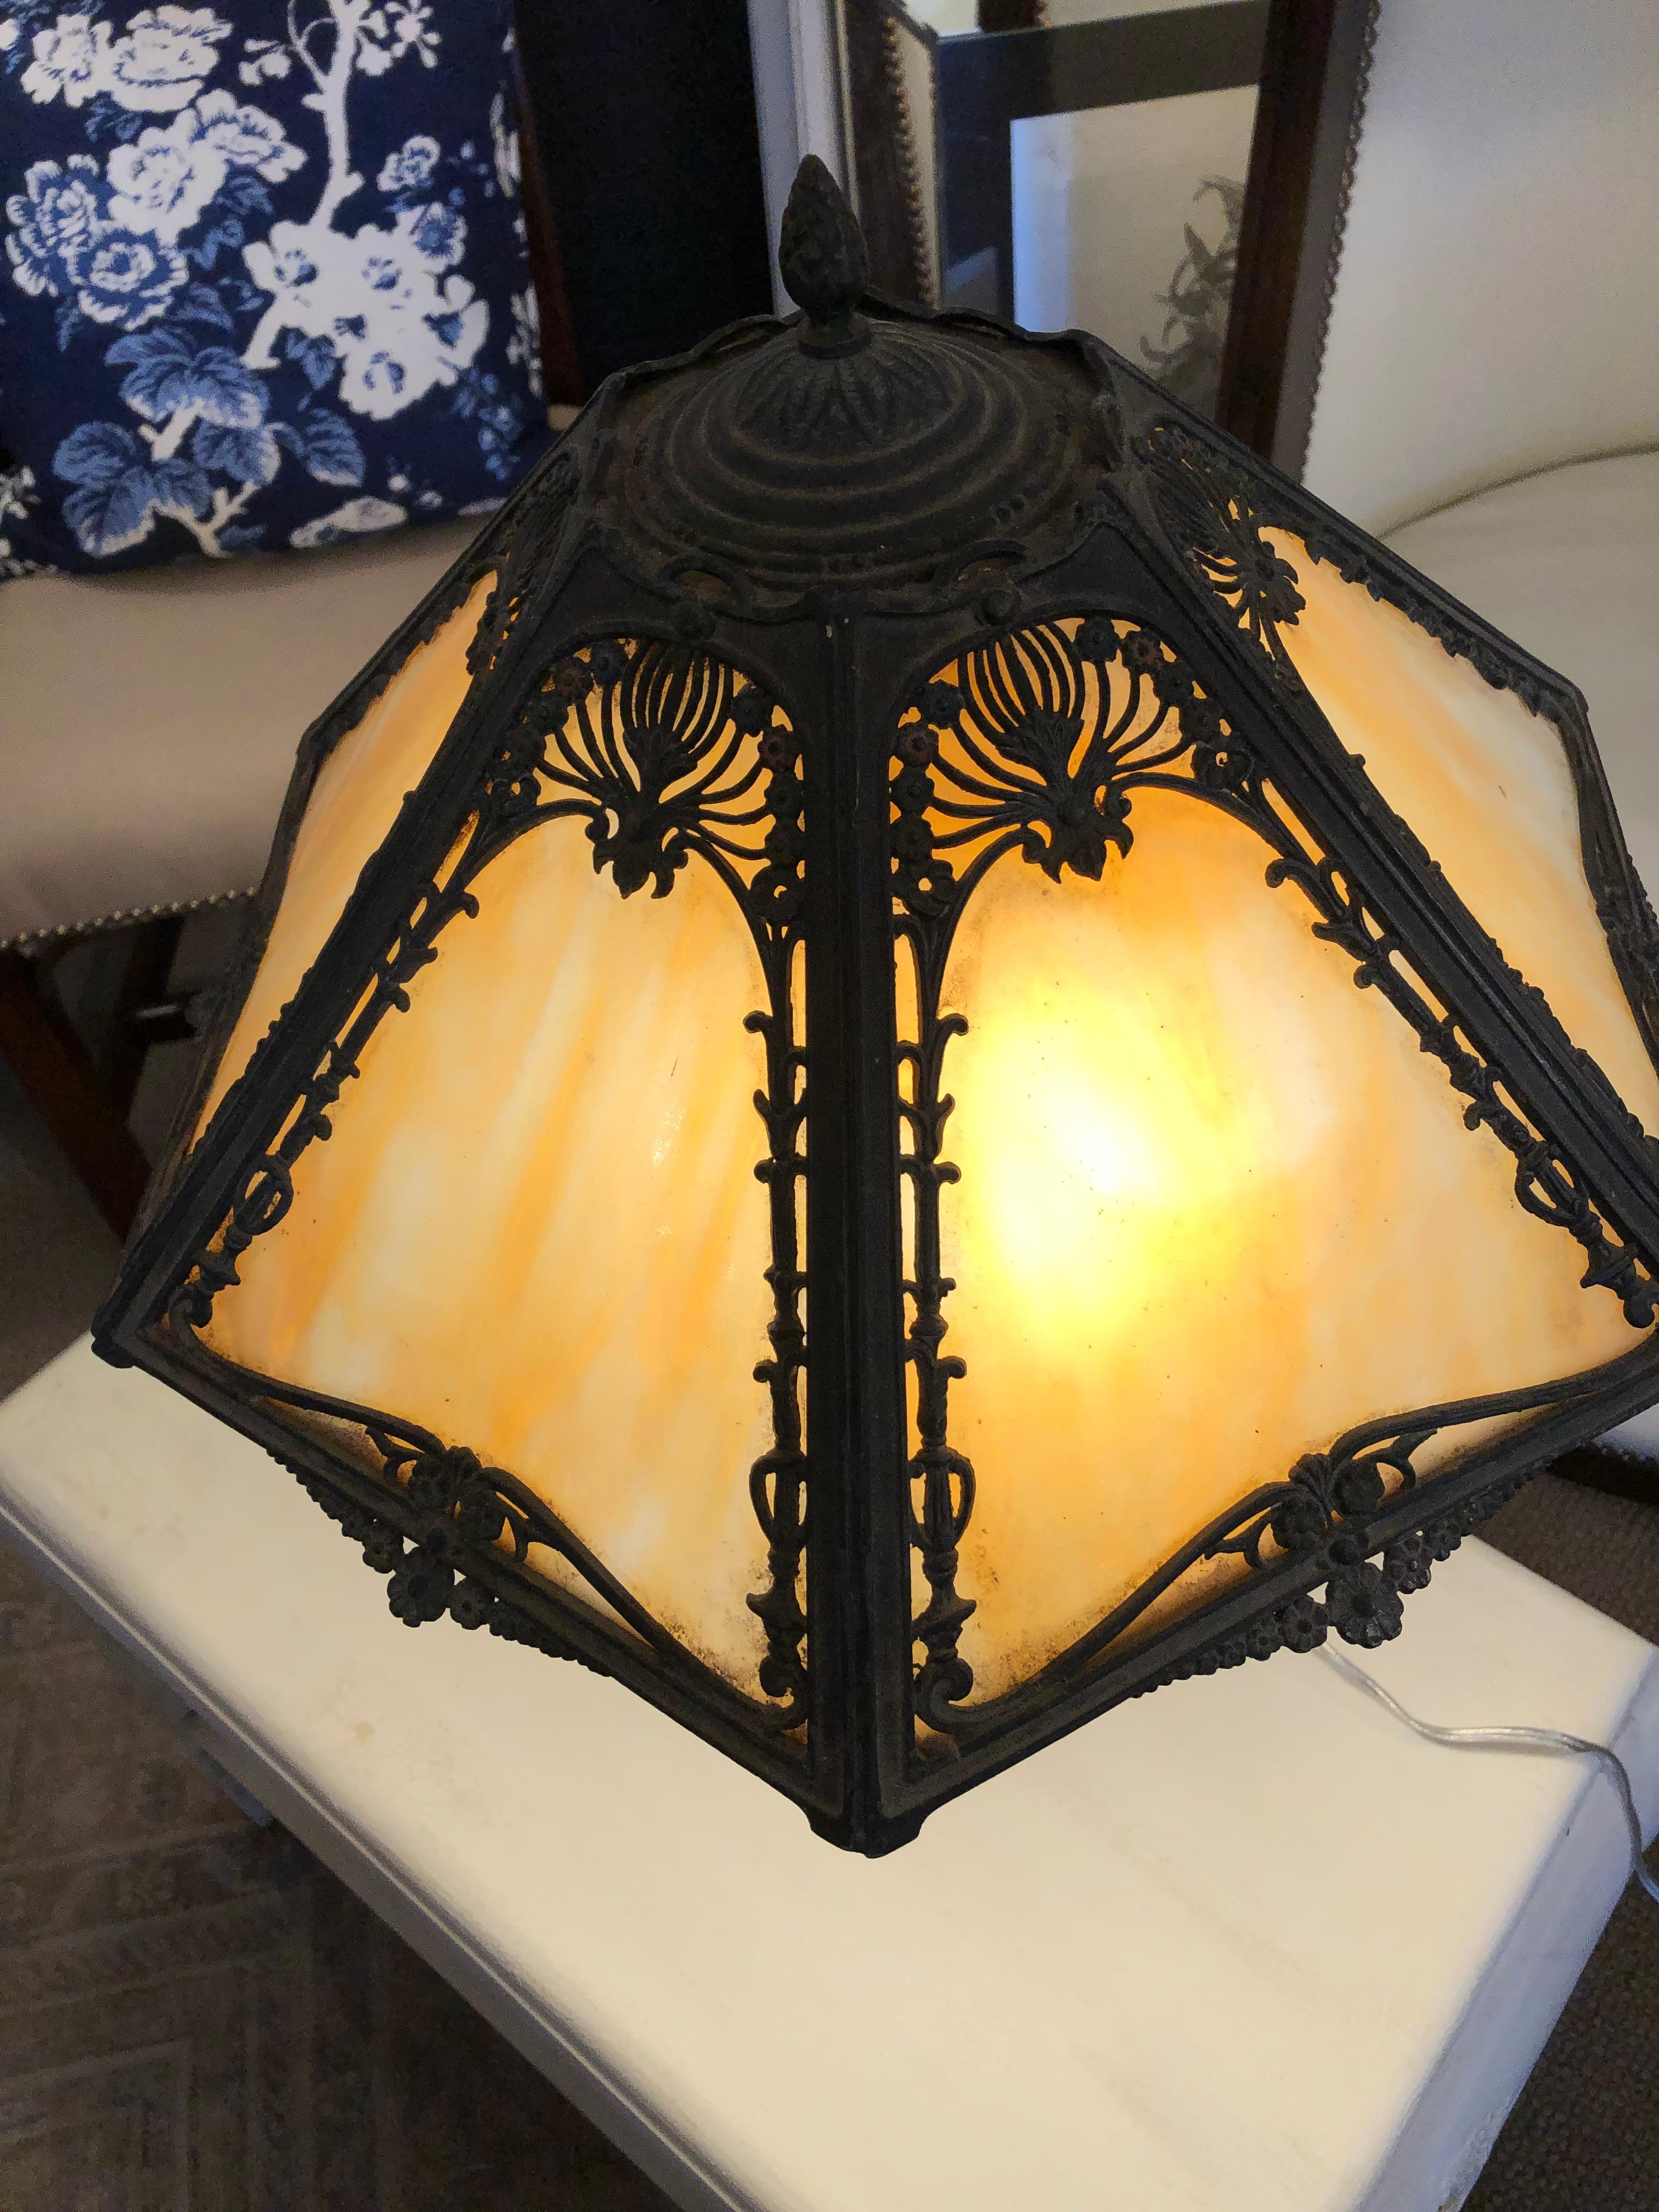 Antique cast iron Tiffany style table lamp having meticulous details and warm butterscotch art glass that glows when illuminated.